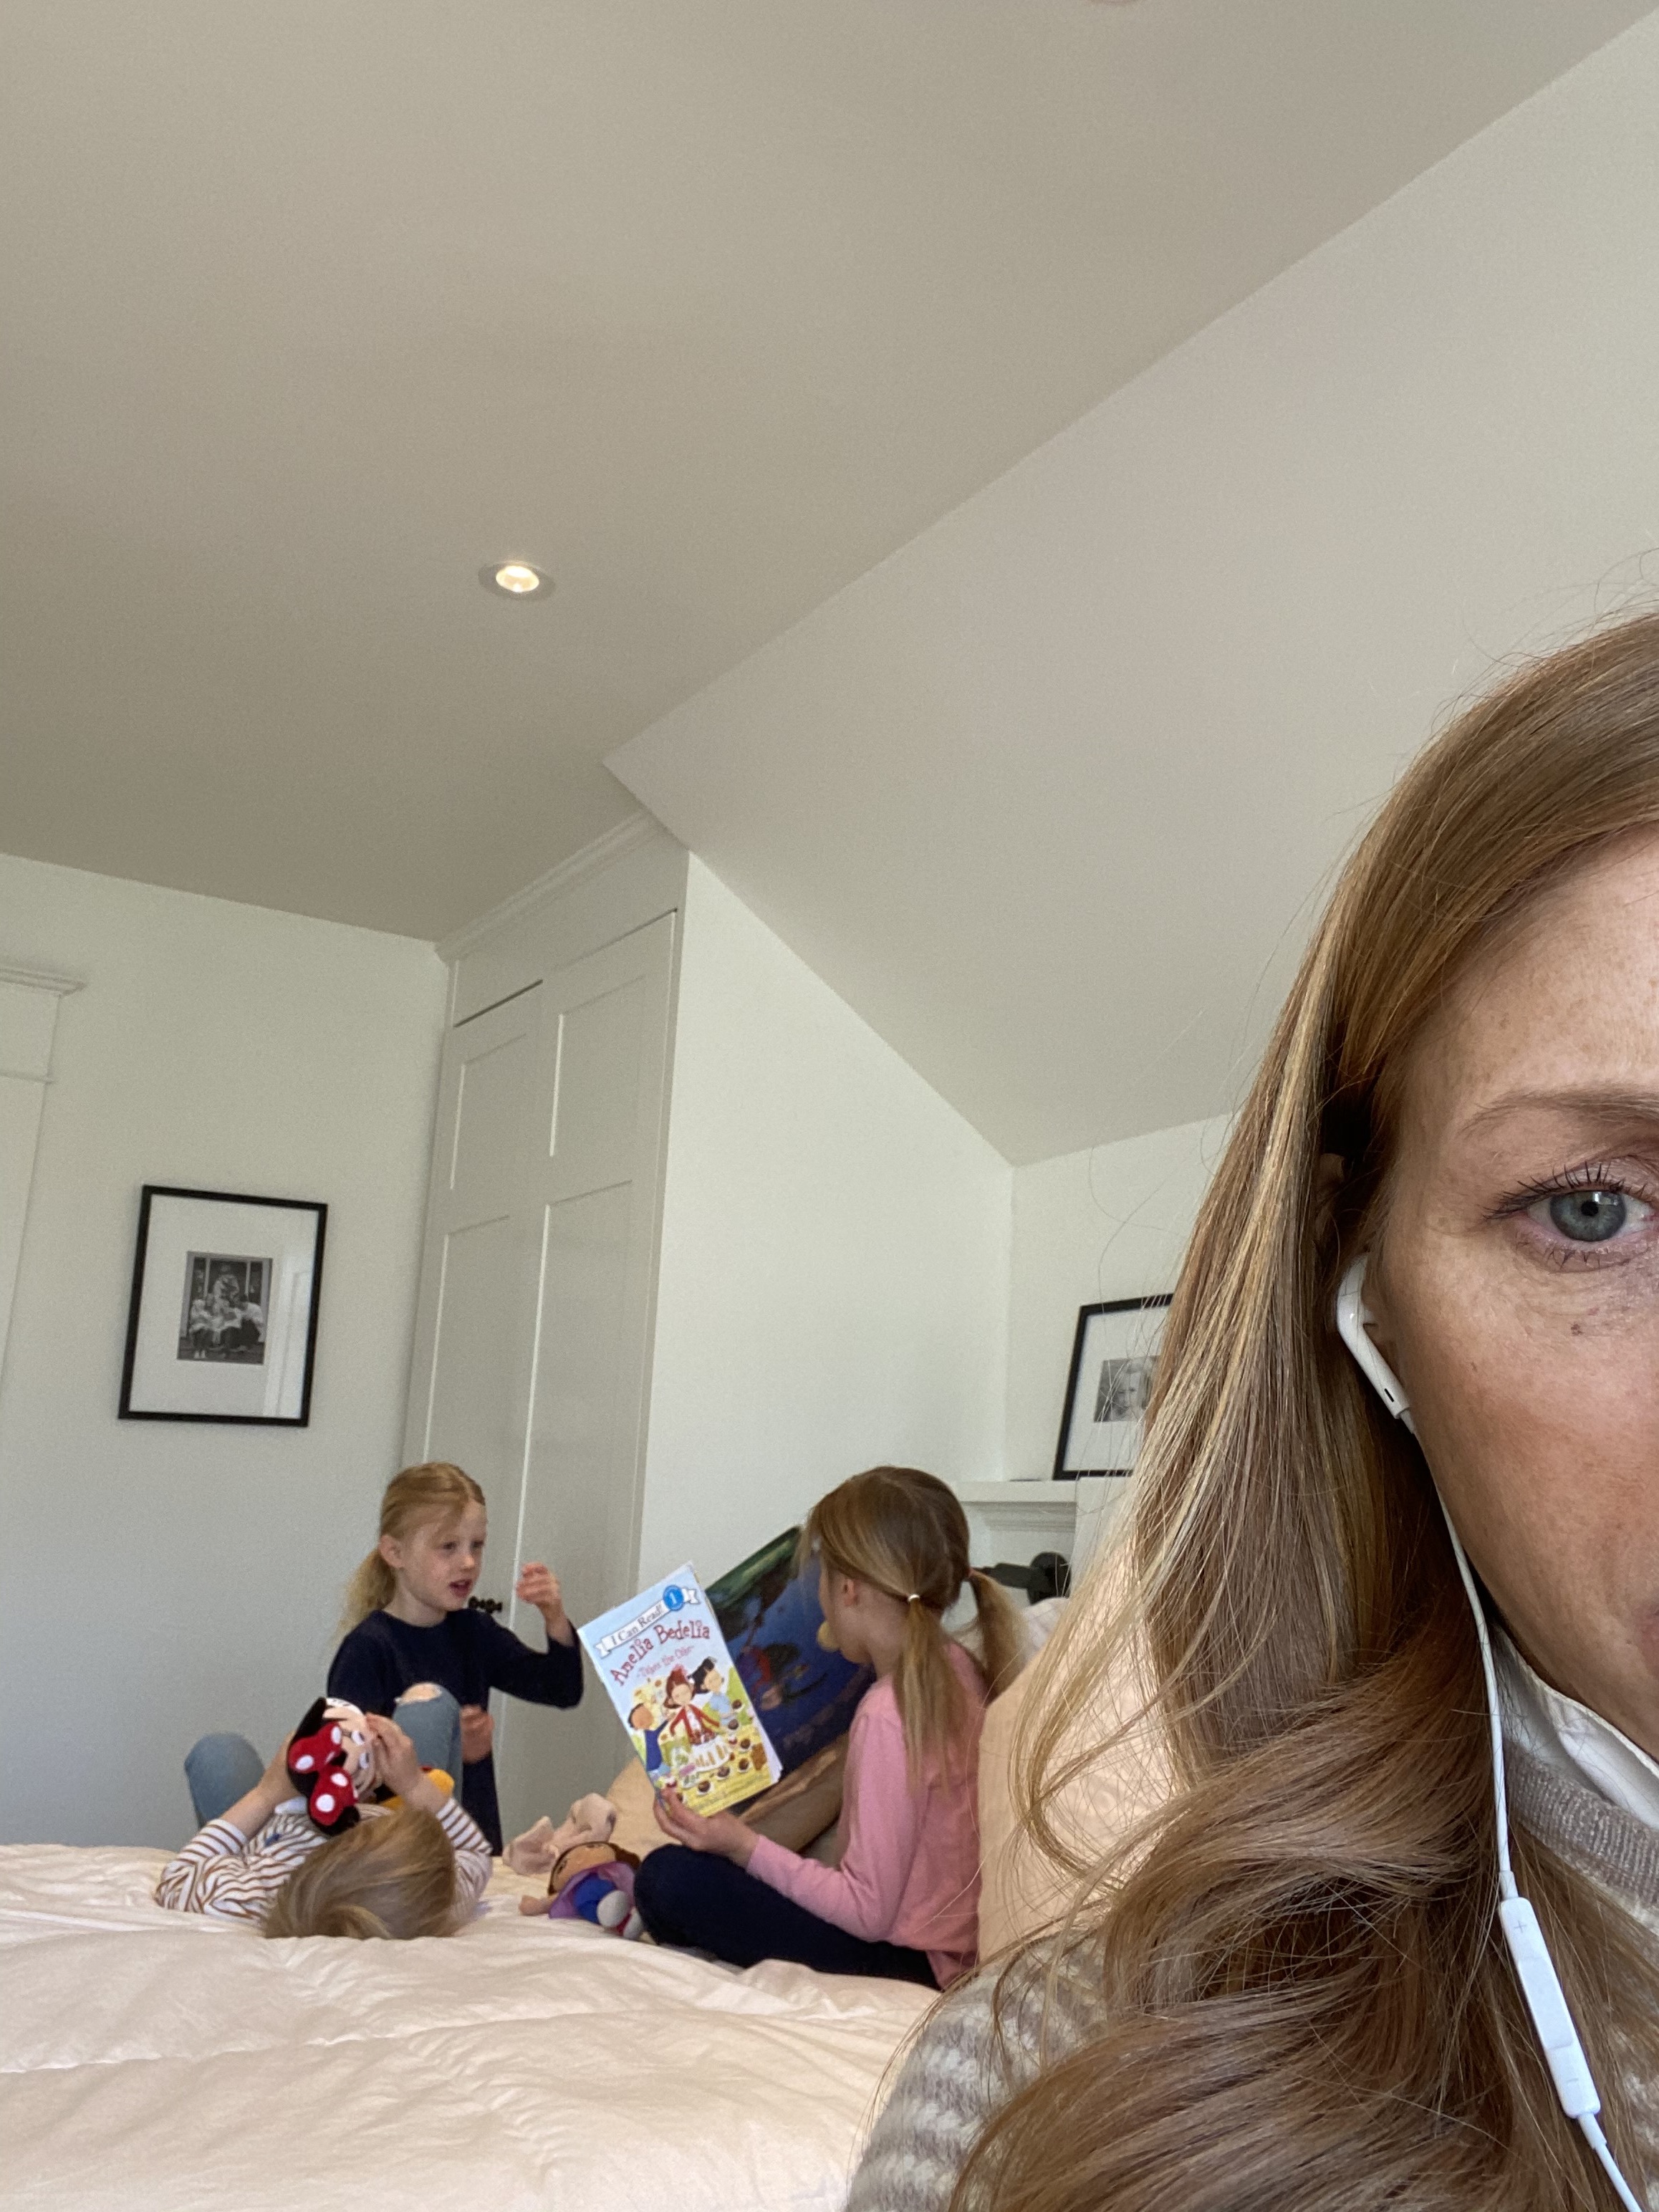 Martha Switzer on a conference call while three children play in the background